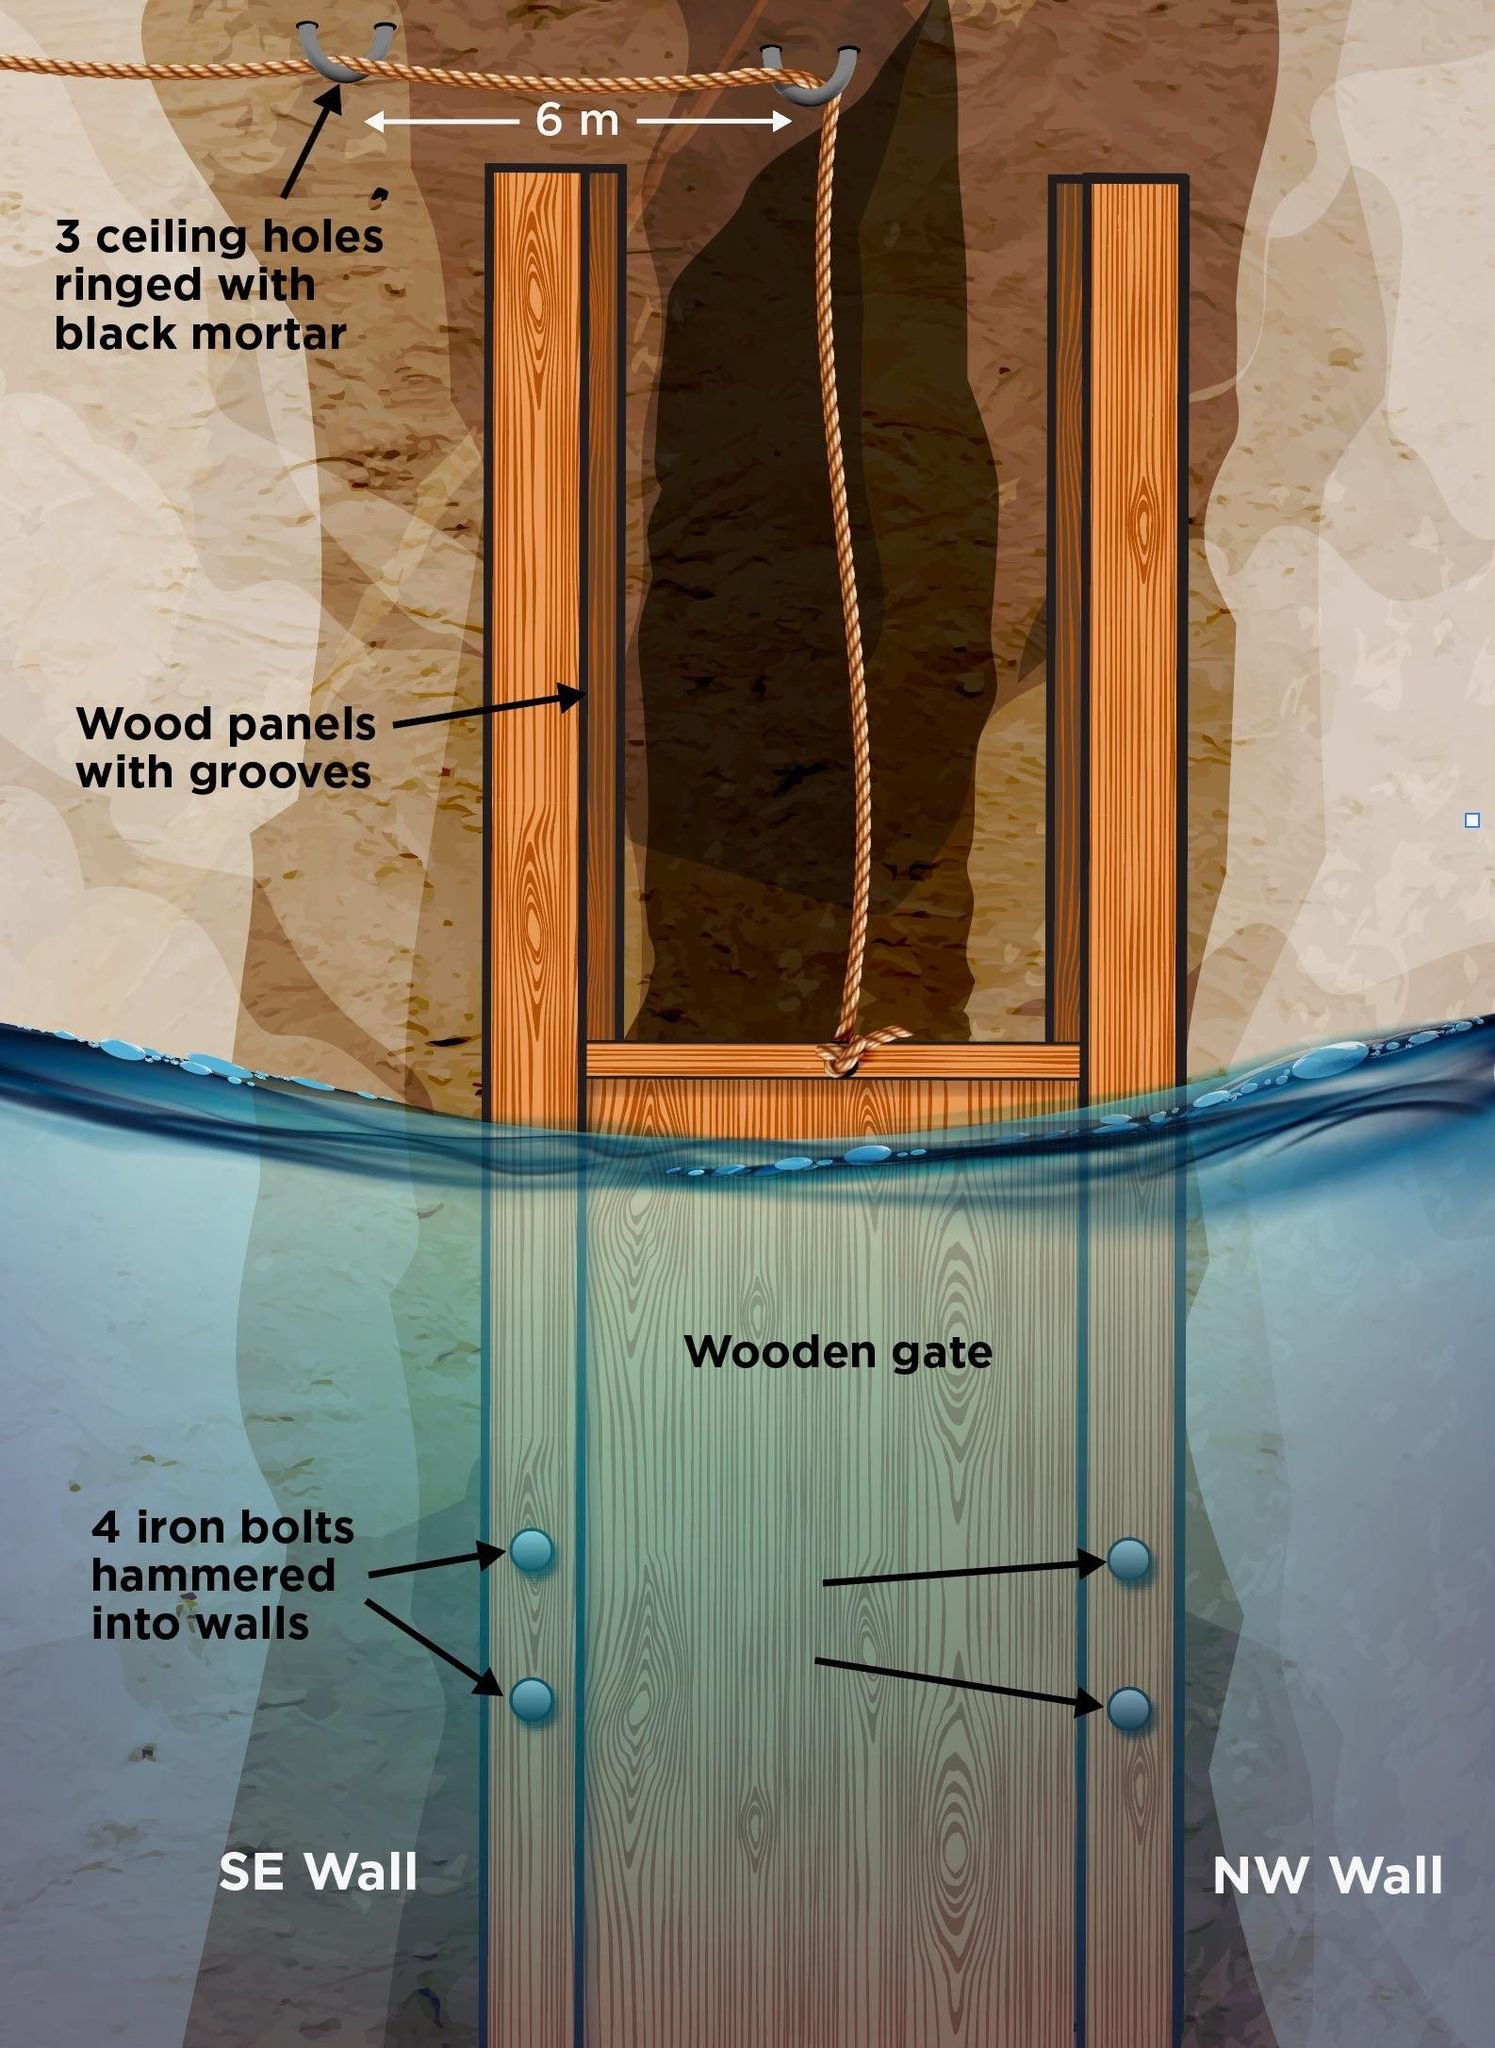 Sluice Gate in Hezekiah's Tunnel, 701 BC, iron bolts, cedar wood, sliding door to block, control water flow from Gihon Srpings